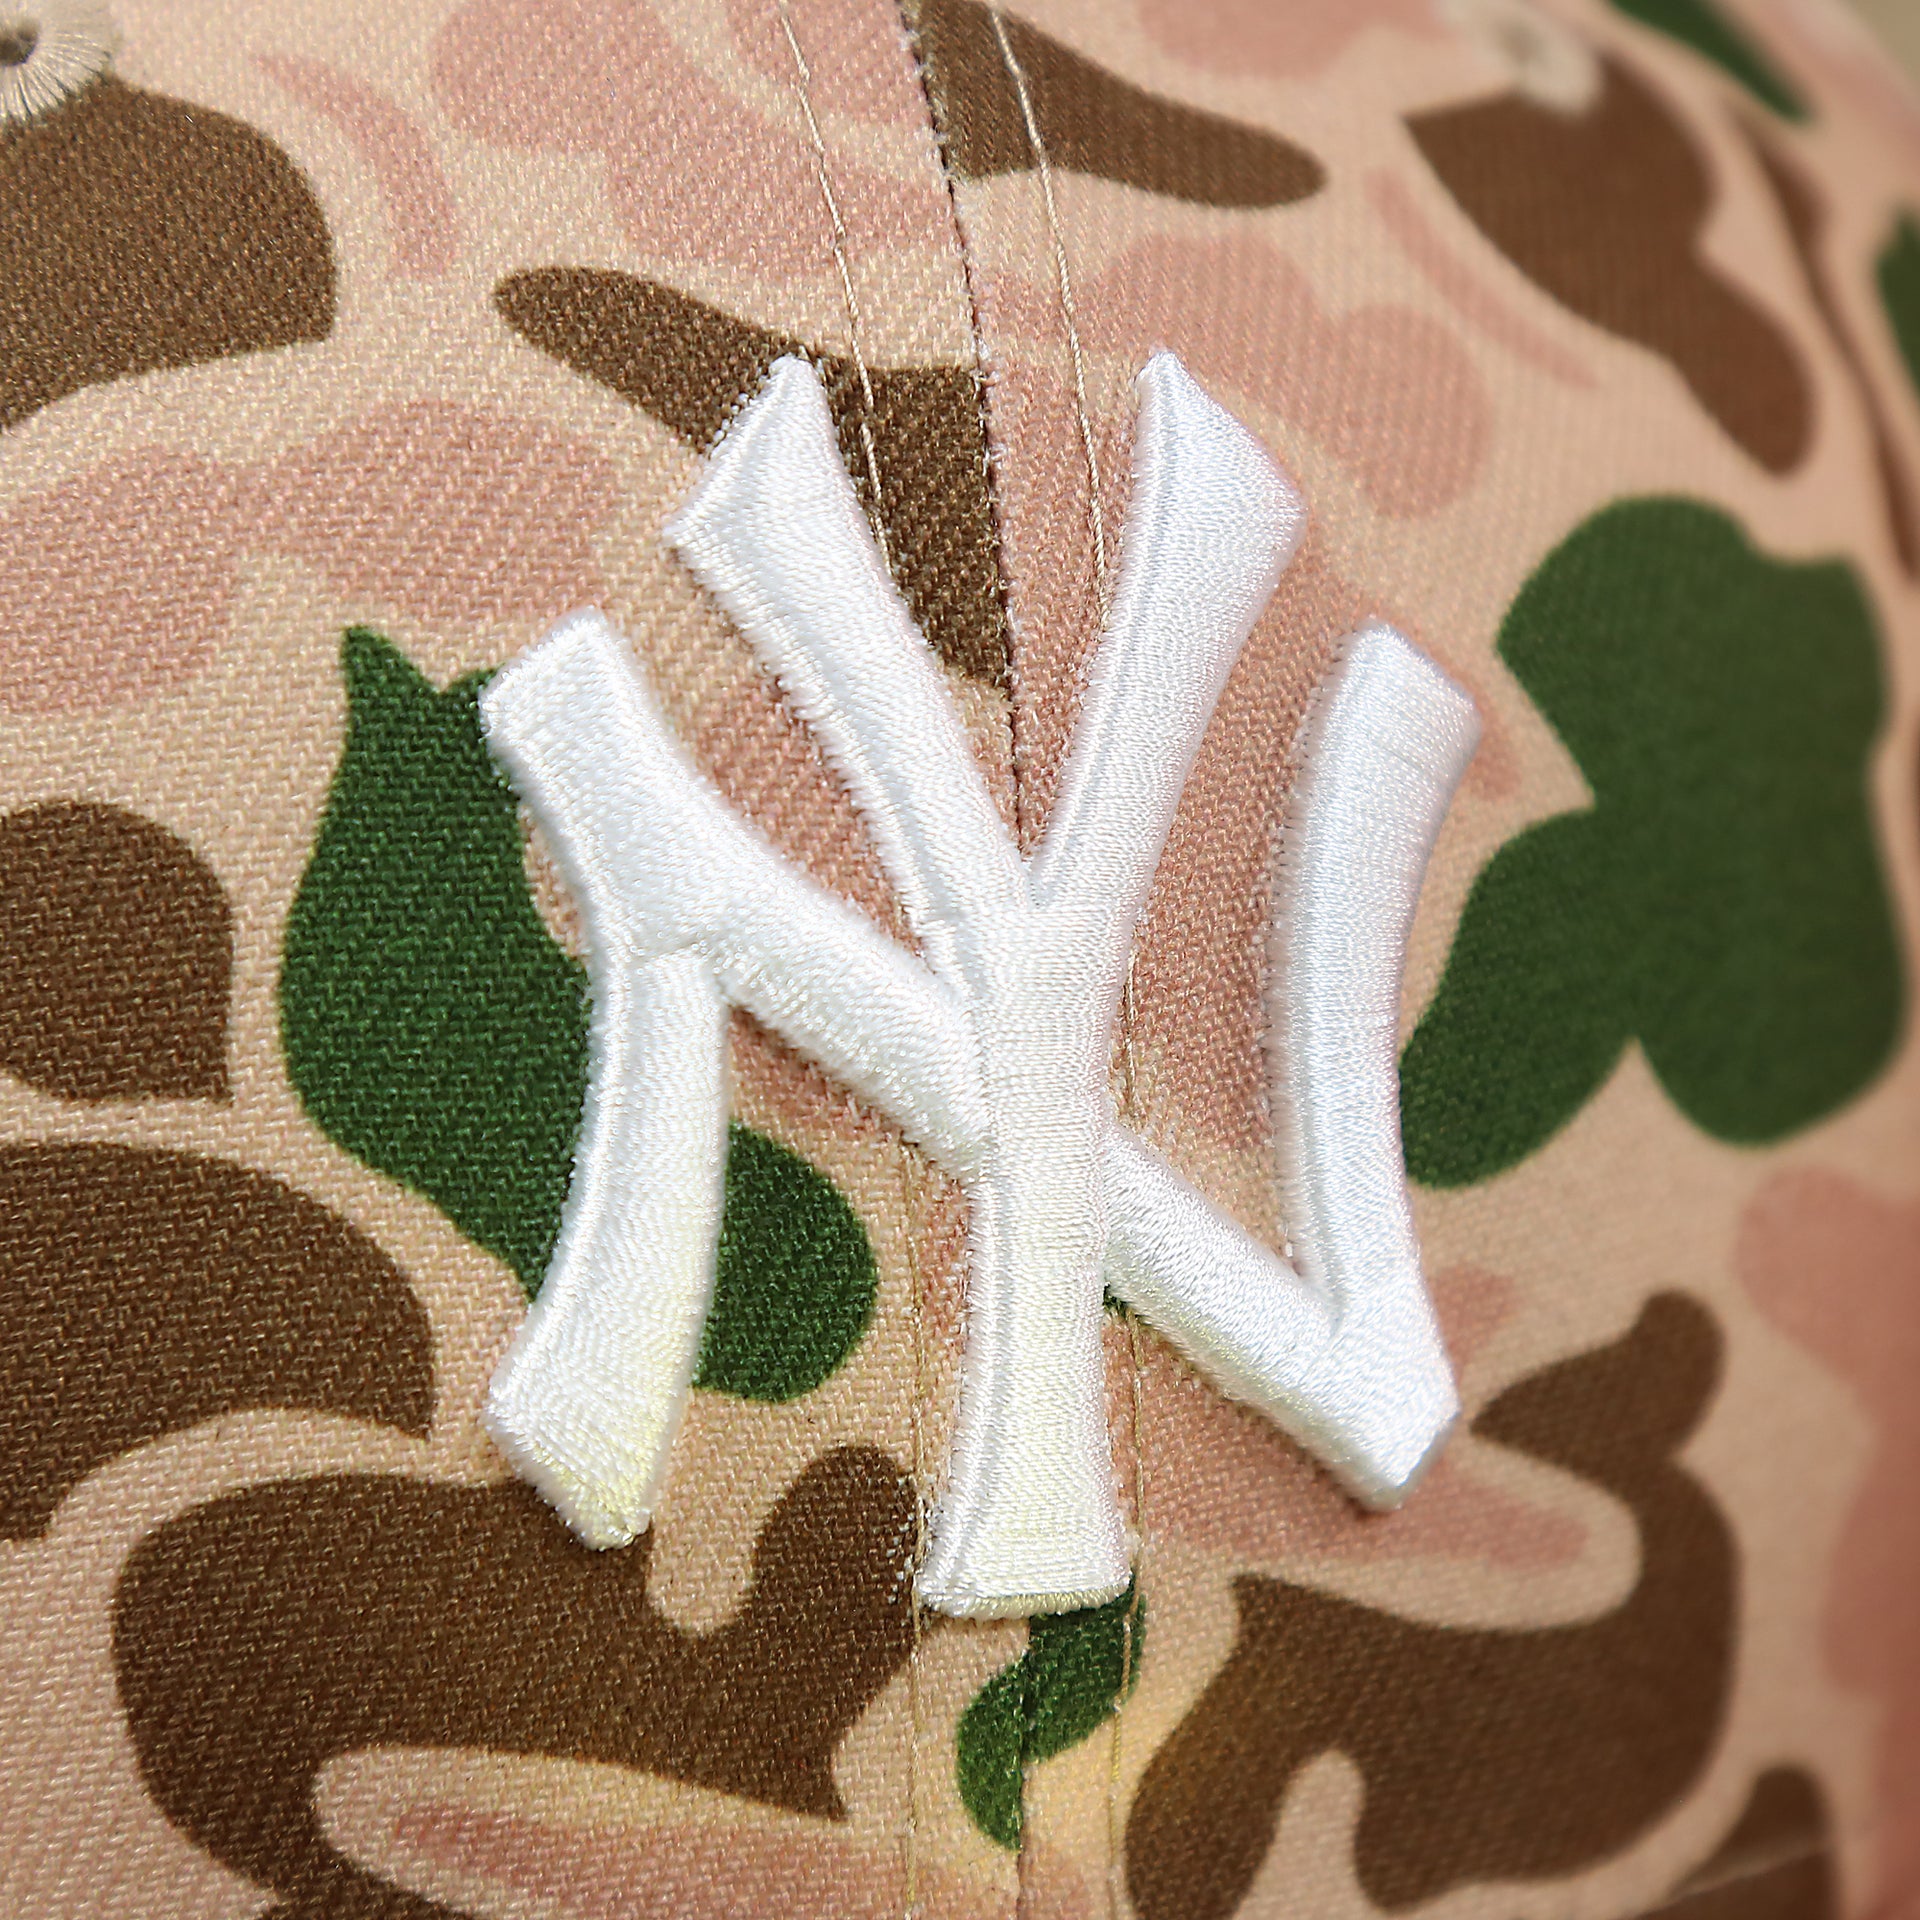 The Yankees Logo on the New York Yankees Duck Camo Neon Orange Undervisor World Series Side Patch Fitted Cap | Camo Tan 59Fifty Cap